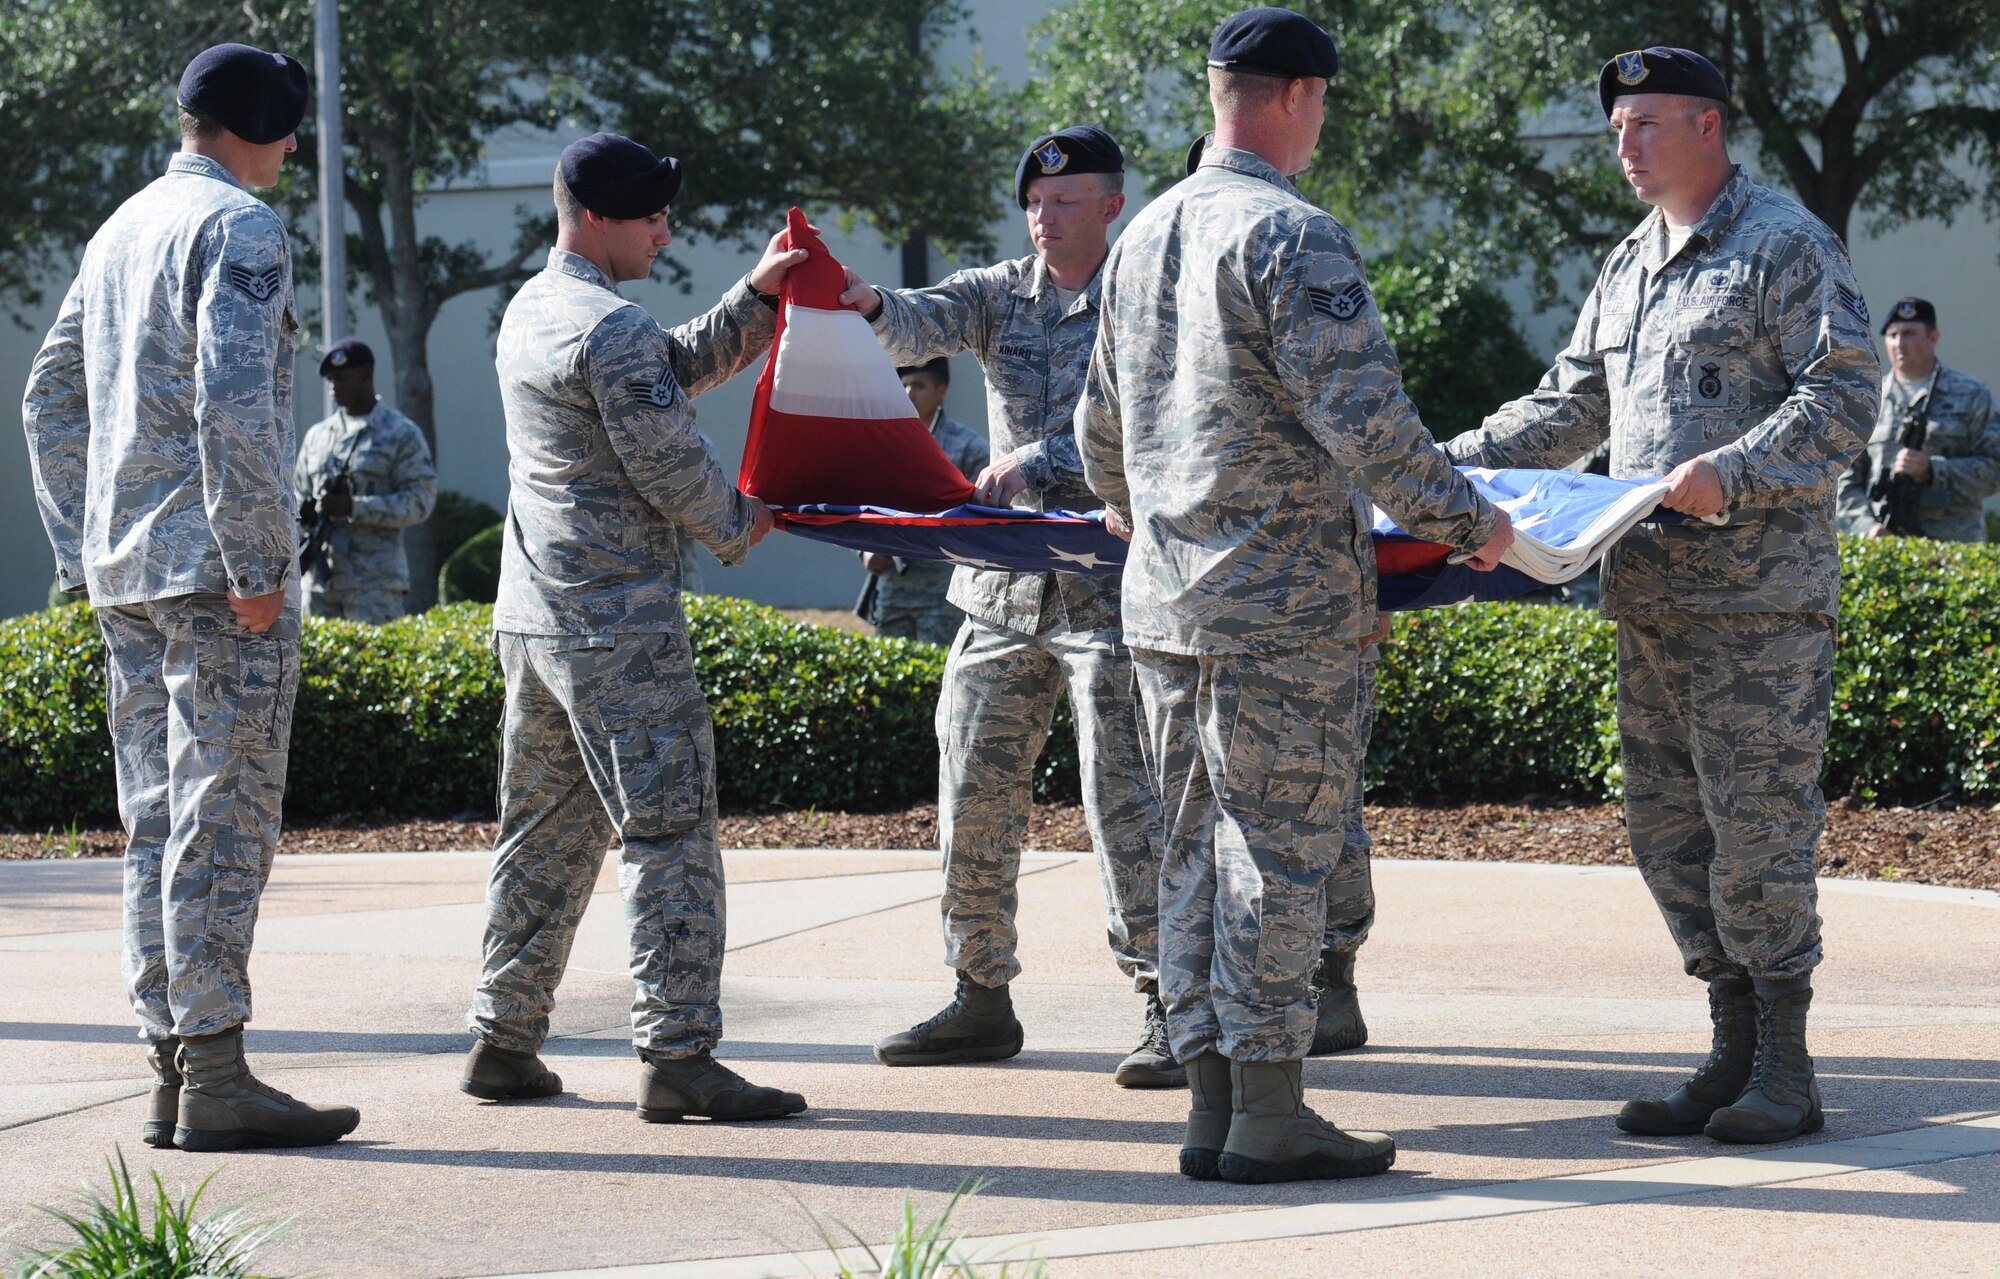 Members of the 81st Security Forces Squadron fold the U.S. flag during the 81st SFS Retreat Ceremony May 19, 2016, Keesler Air Force Base, Miss. The ceremony was held during National Police Week, which recognizes the service of law enforcement men and women who put their lives at risk every day. (U.S. Air Force photo by Kemberly Groue)